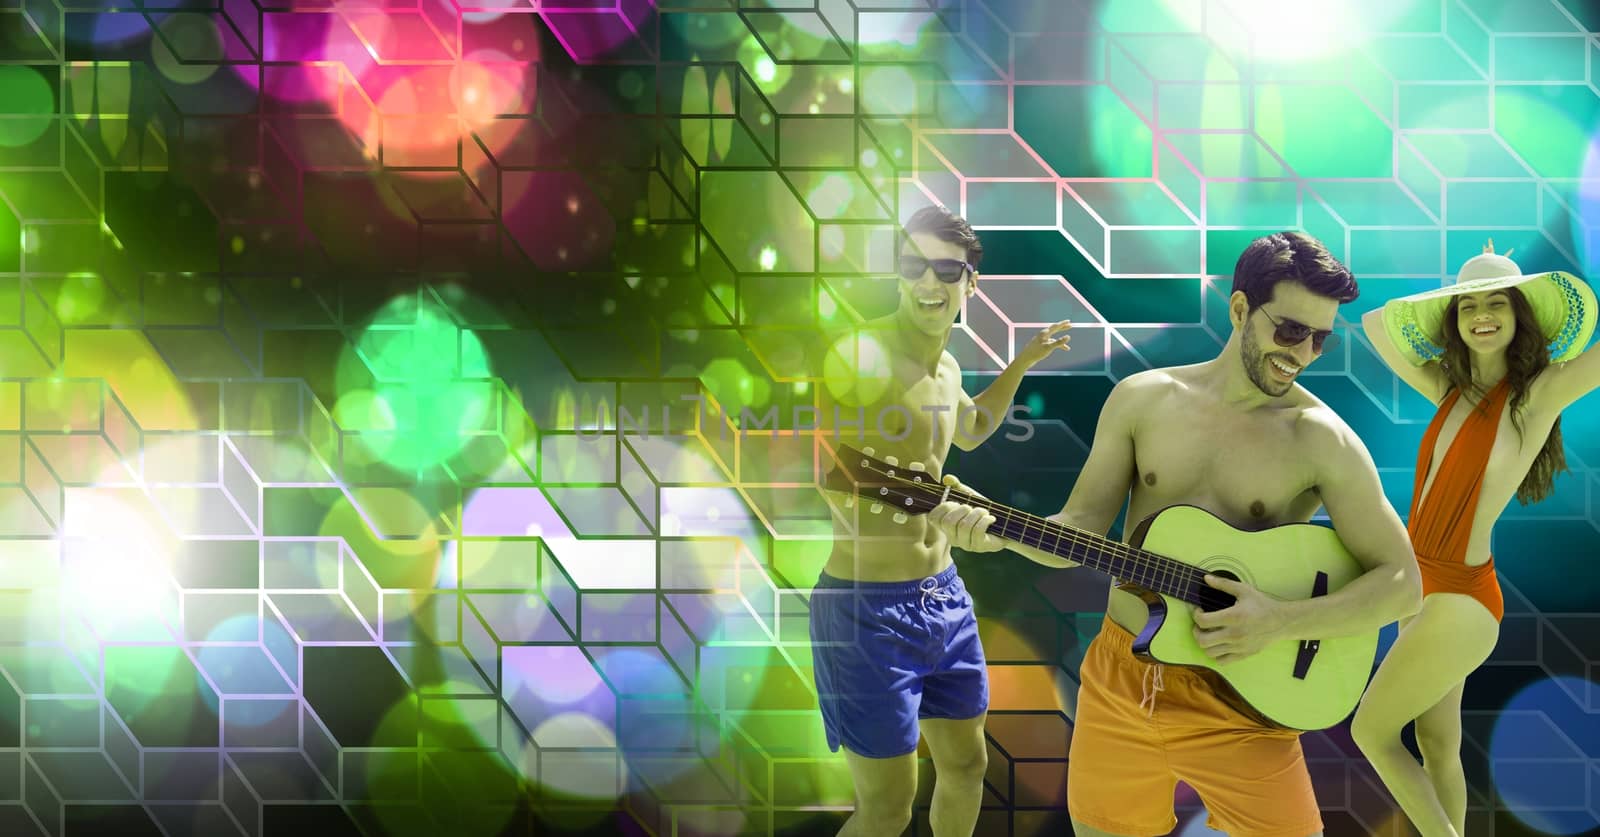 Digital composite of Fun Summer friends playing guitar with geometric party lights venue atmosphere